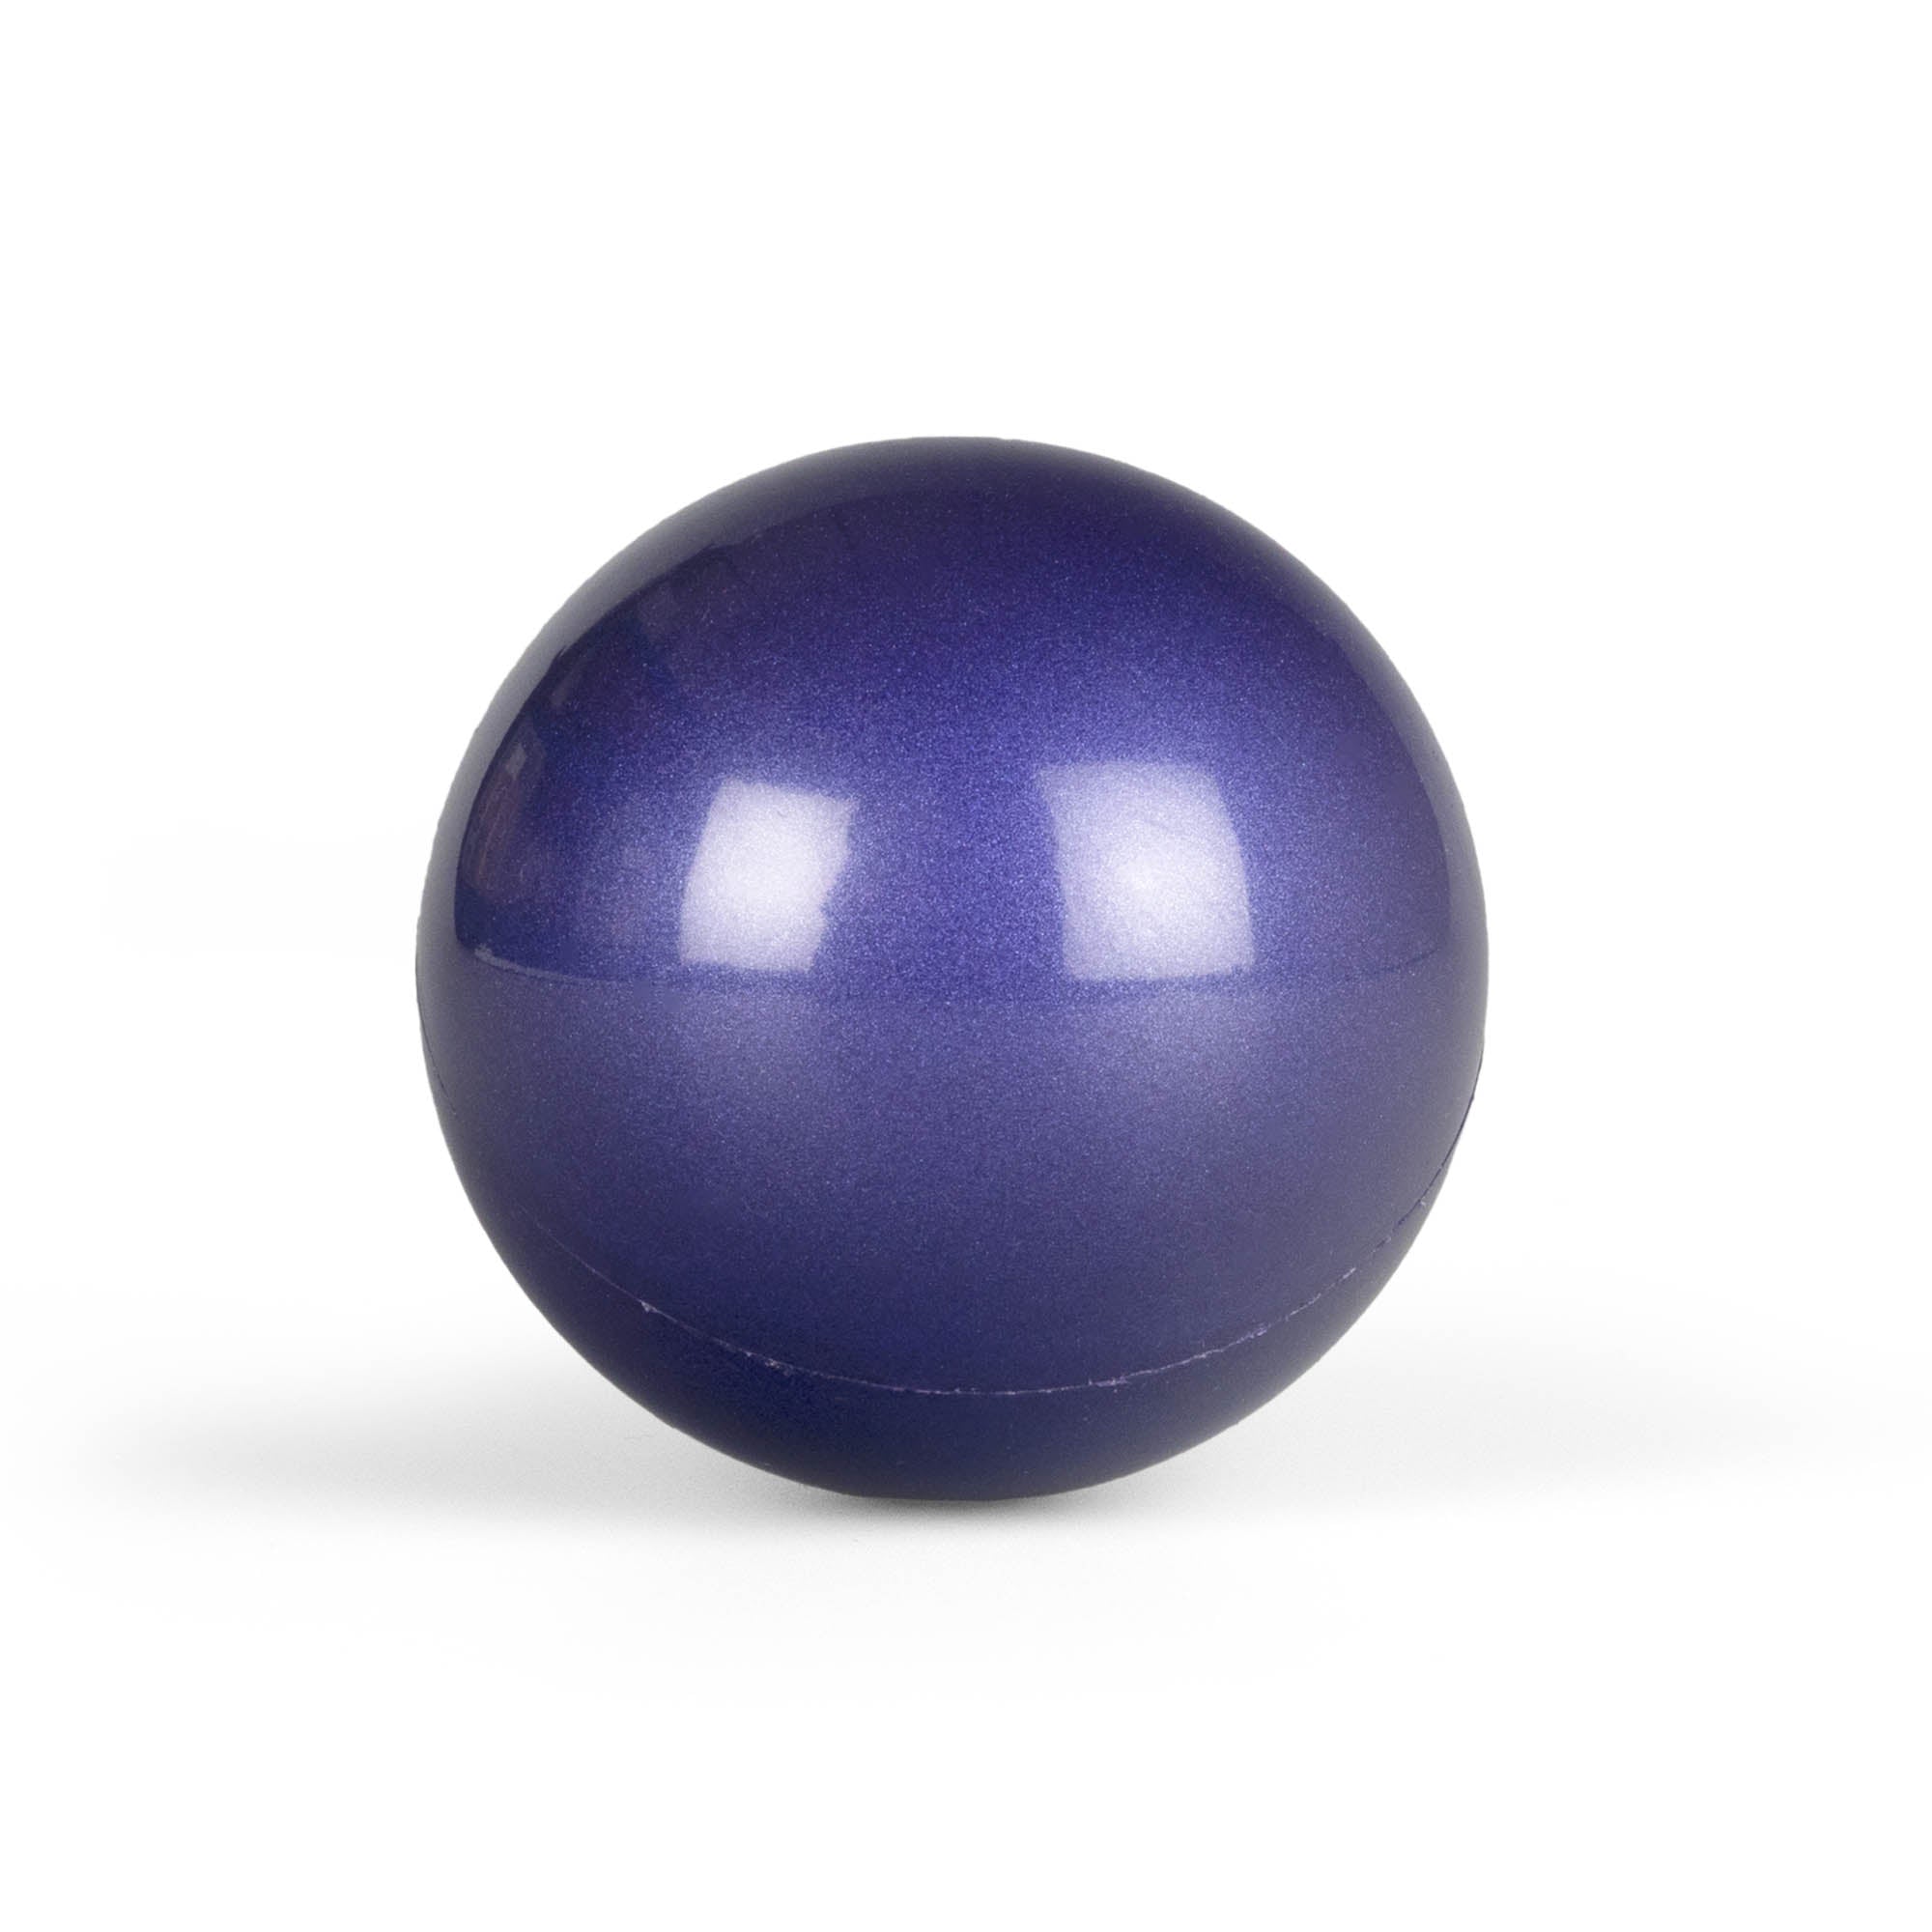 Mr babache 100mm stage ball purple straight on white background